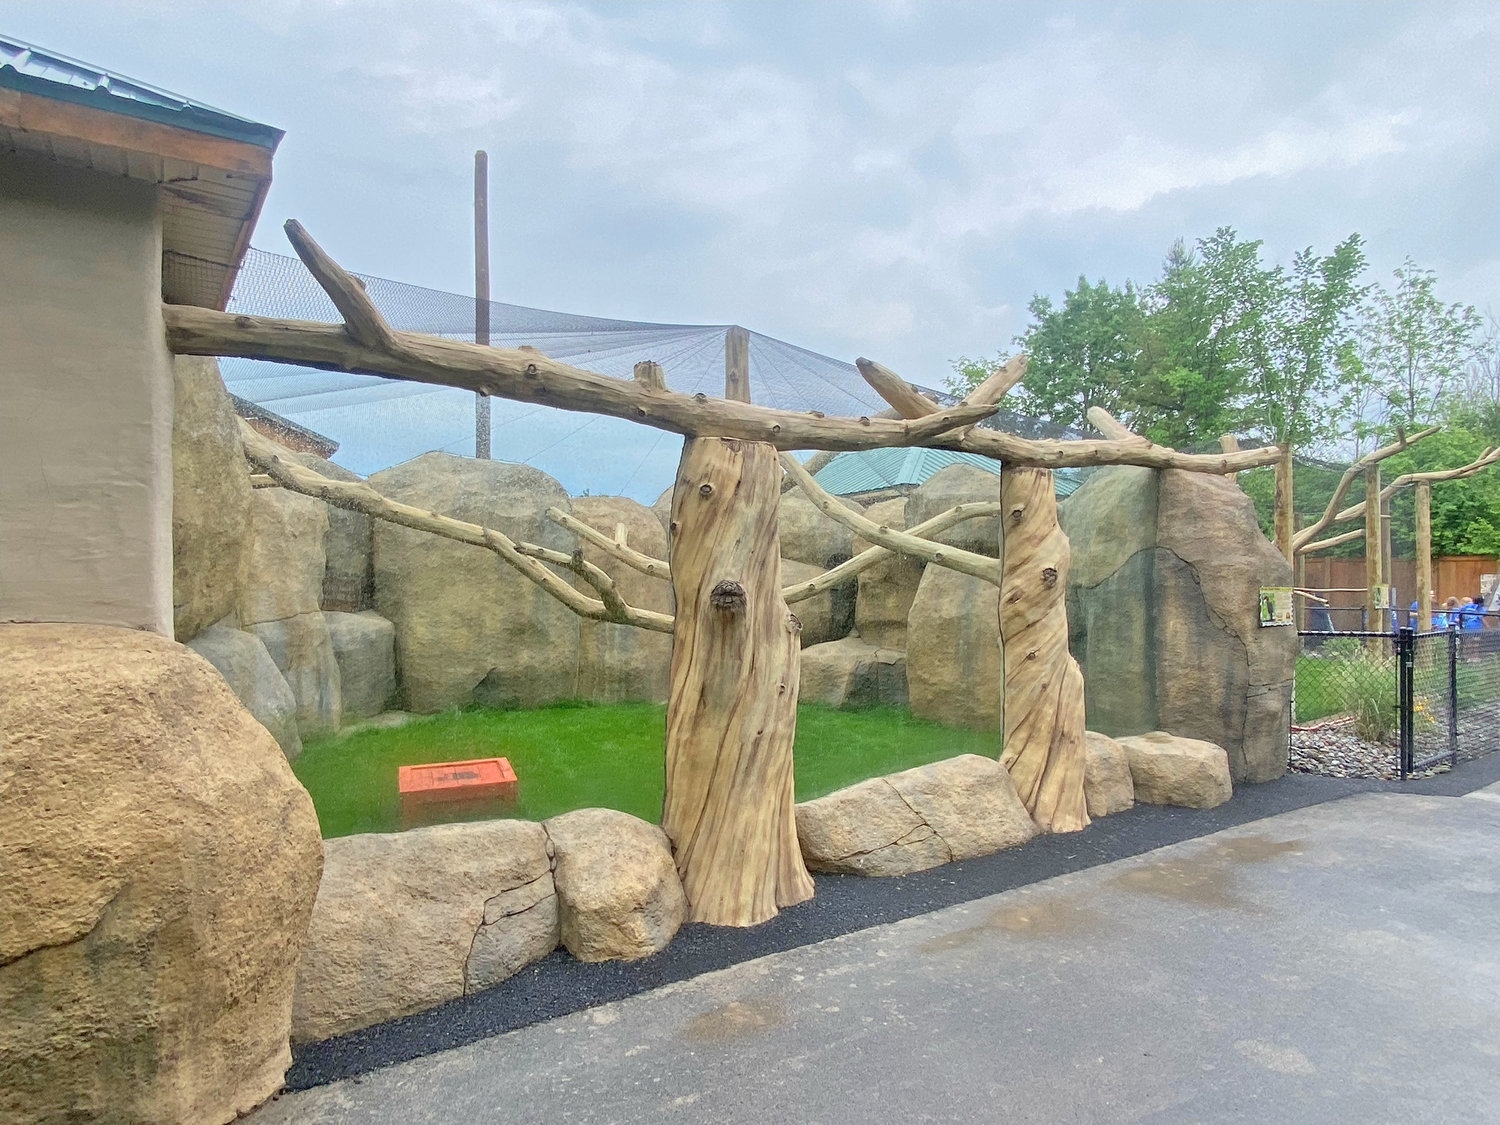 The Wild Animal Park in Chittenango is unveiling four new exhibits this weekend. The exhibits will feature animals from Africa. Specifically, the Southern Ground Hornbill, the Warthog, Lemurs, and the Albino African Porcupine.